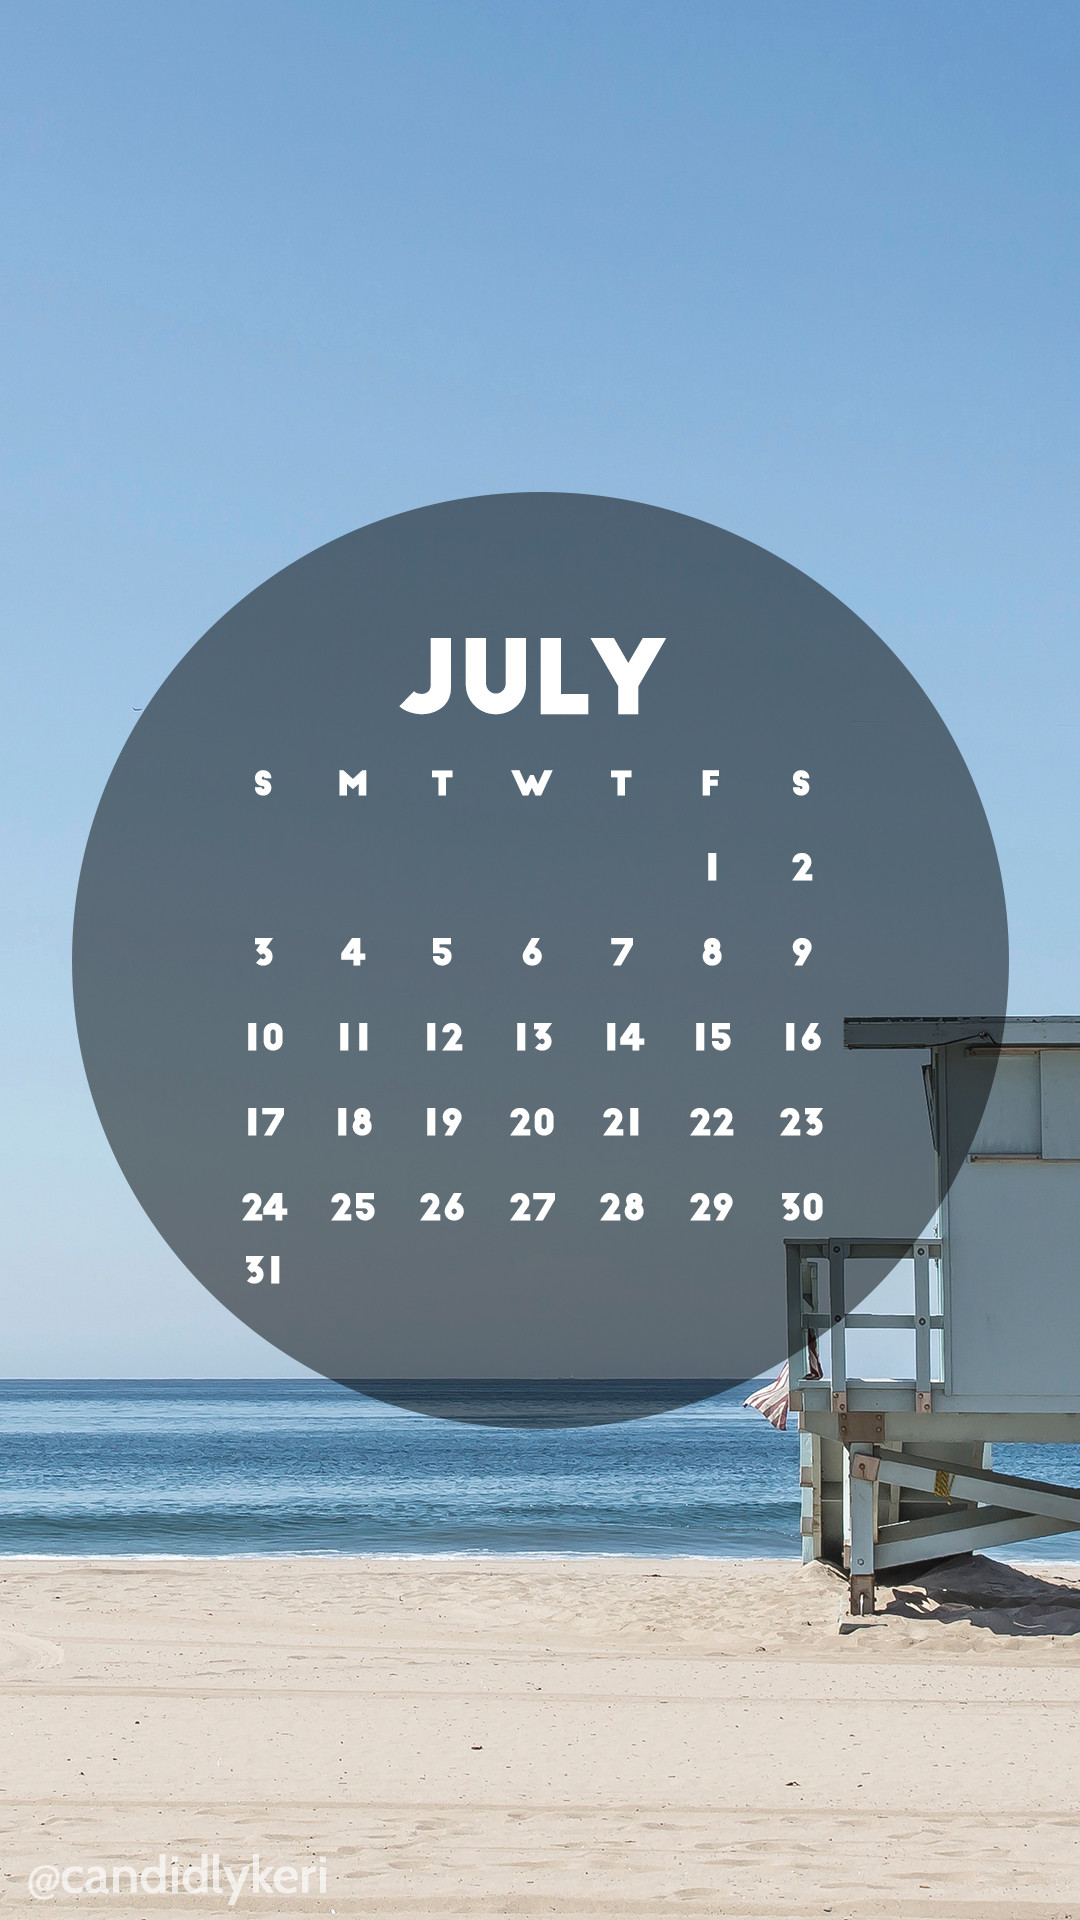 1080x1920 Beach Scene California lifeguard stand July 2016 calendar wallpaper free  download for iPhone android or desktop